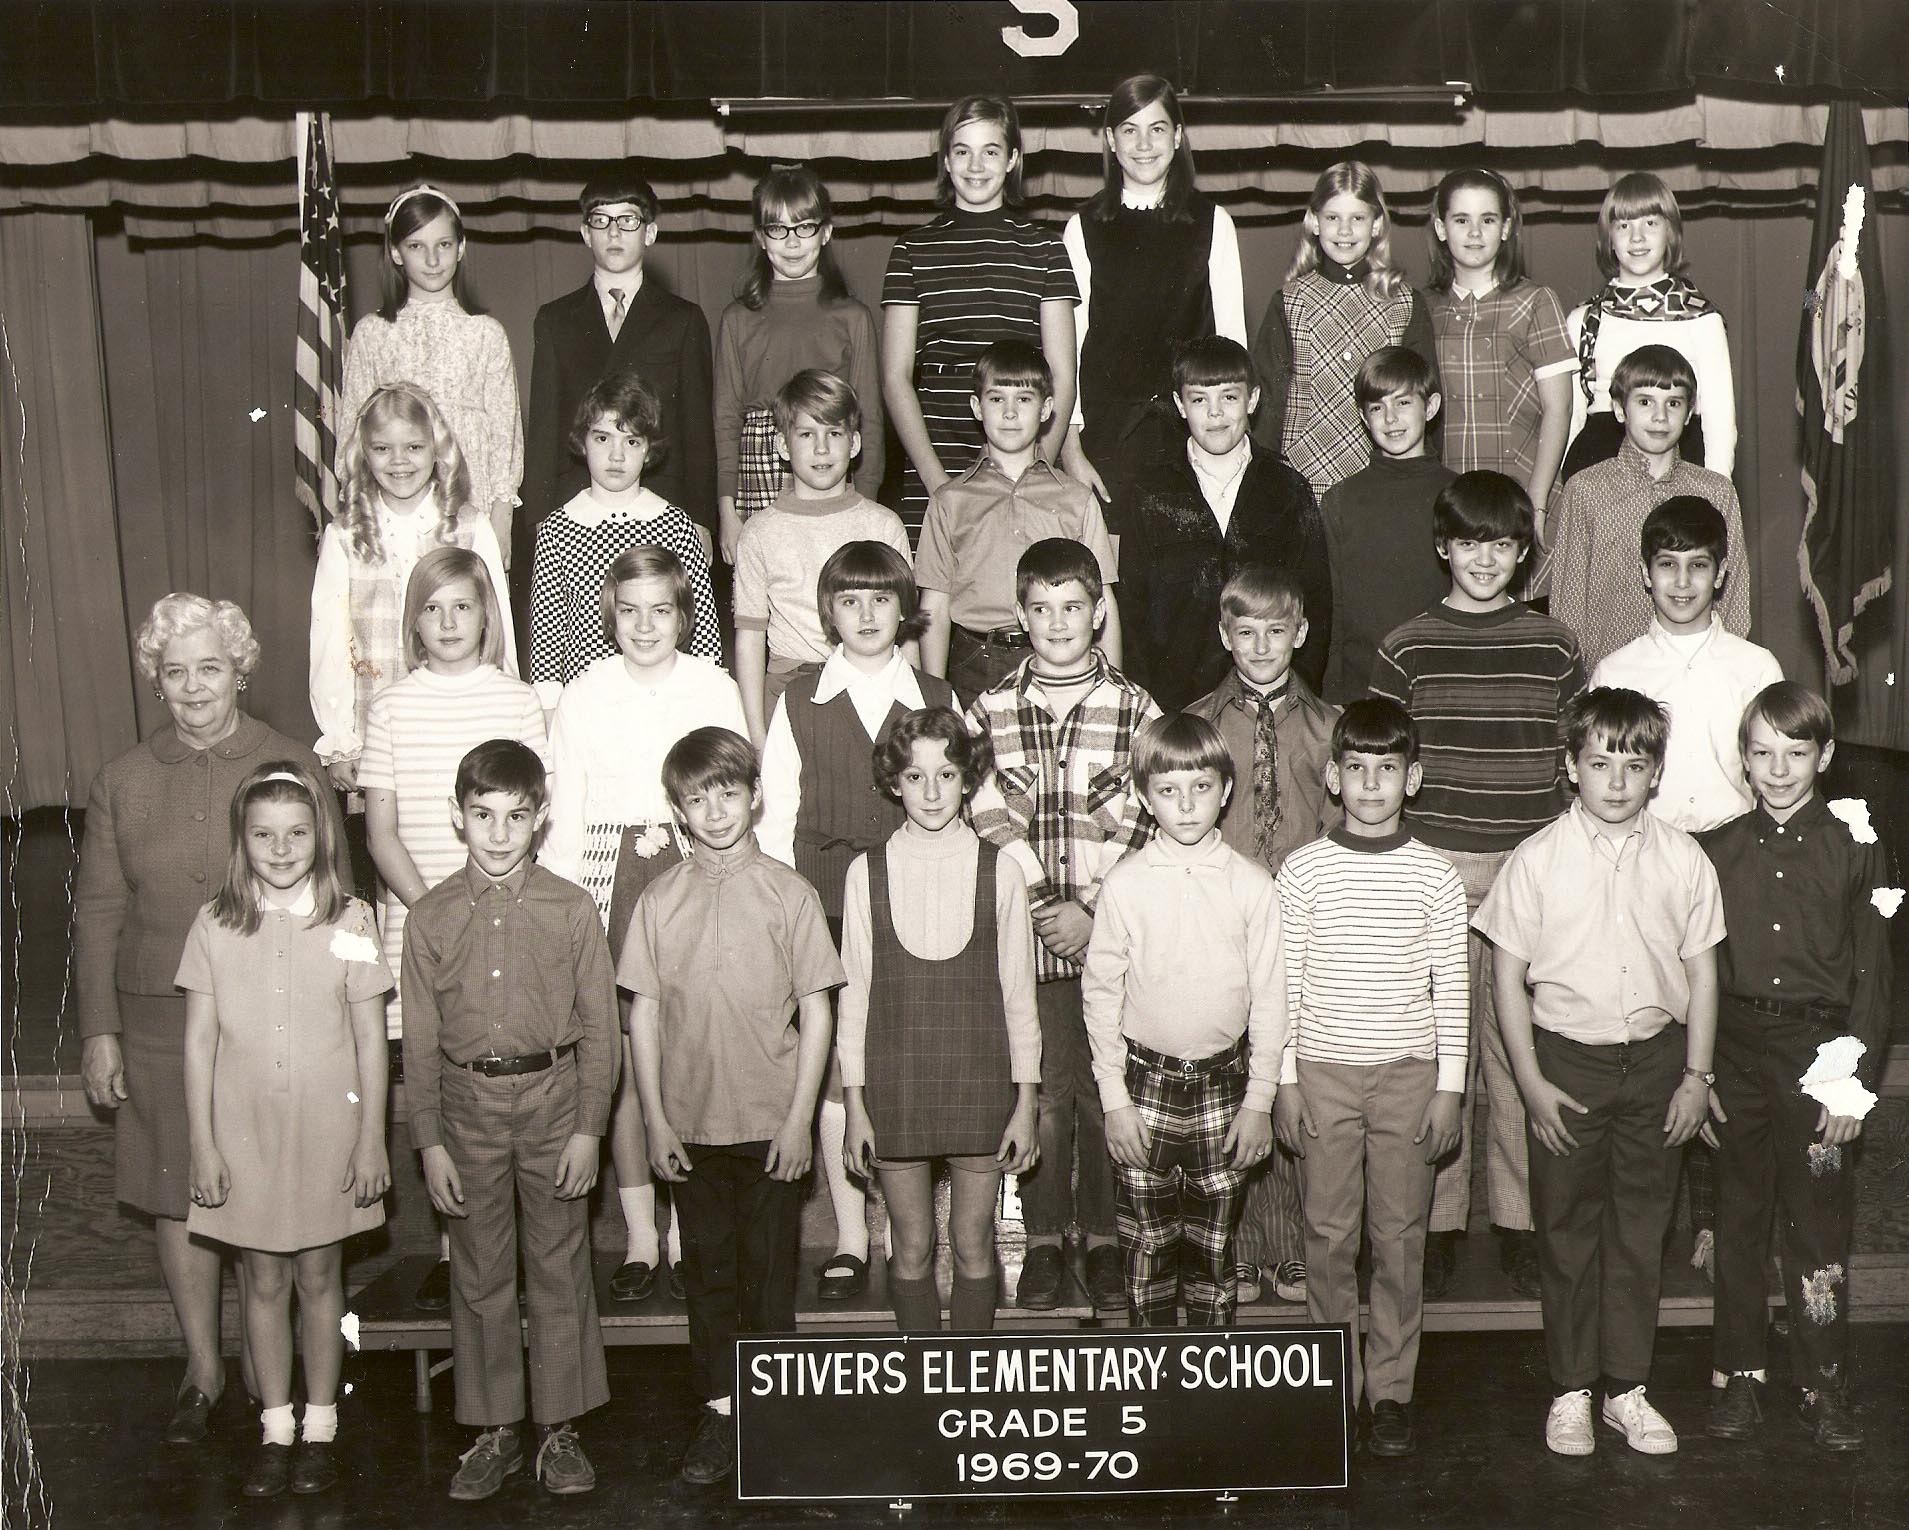 My class photo from O.J. Stivers Elementary, 1969-1970. I'm in the front row, fourth from the right. I look happy to be there. It must be the plaid pants.